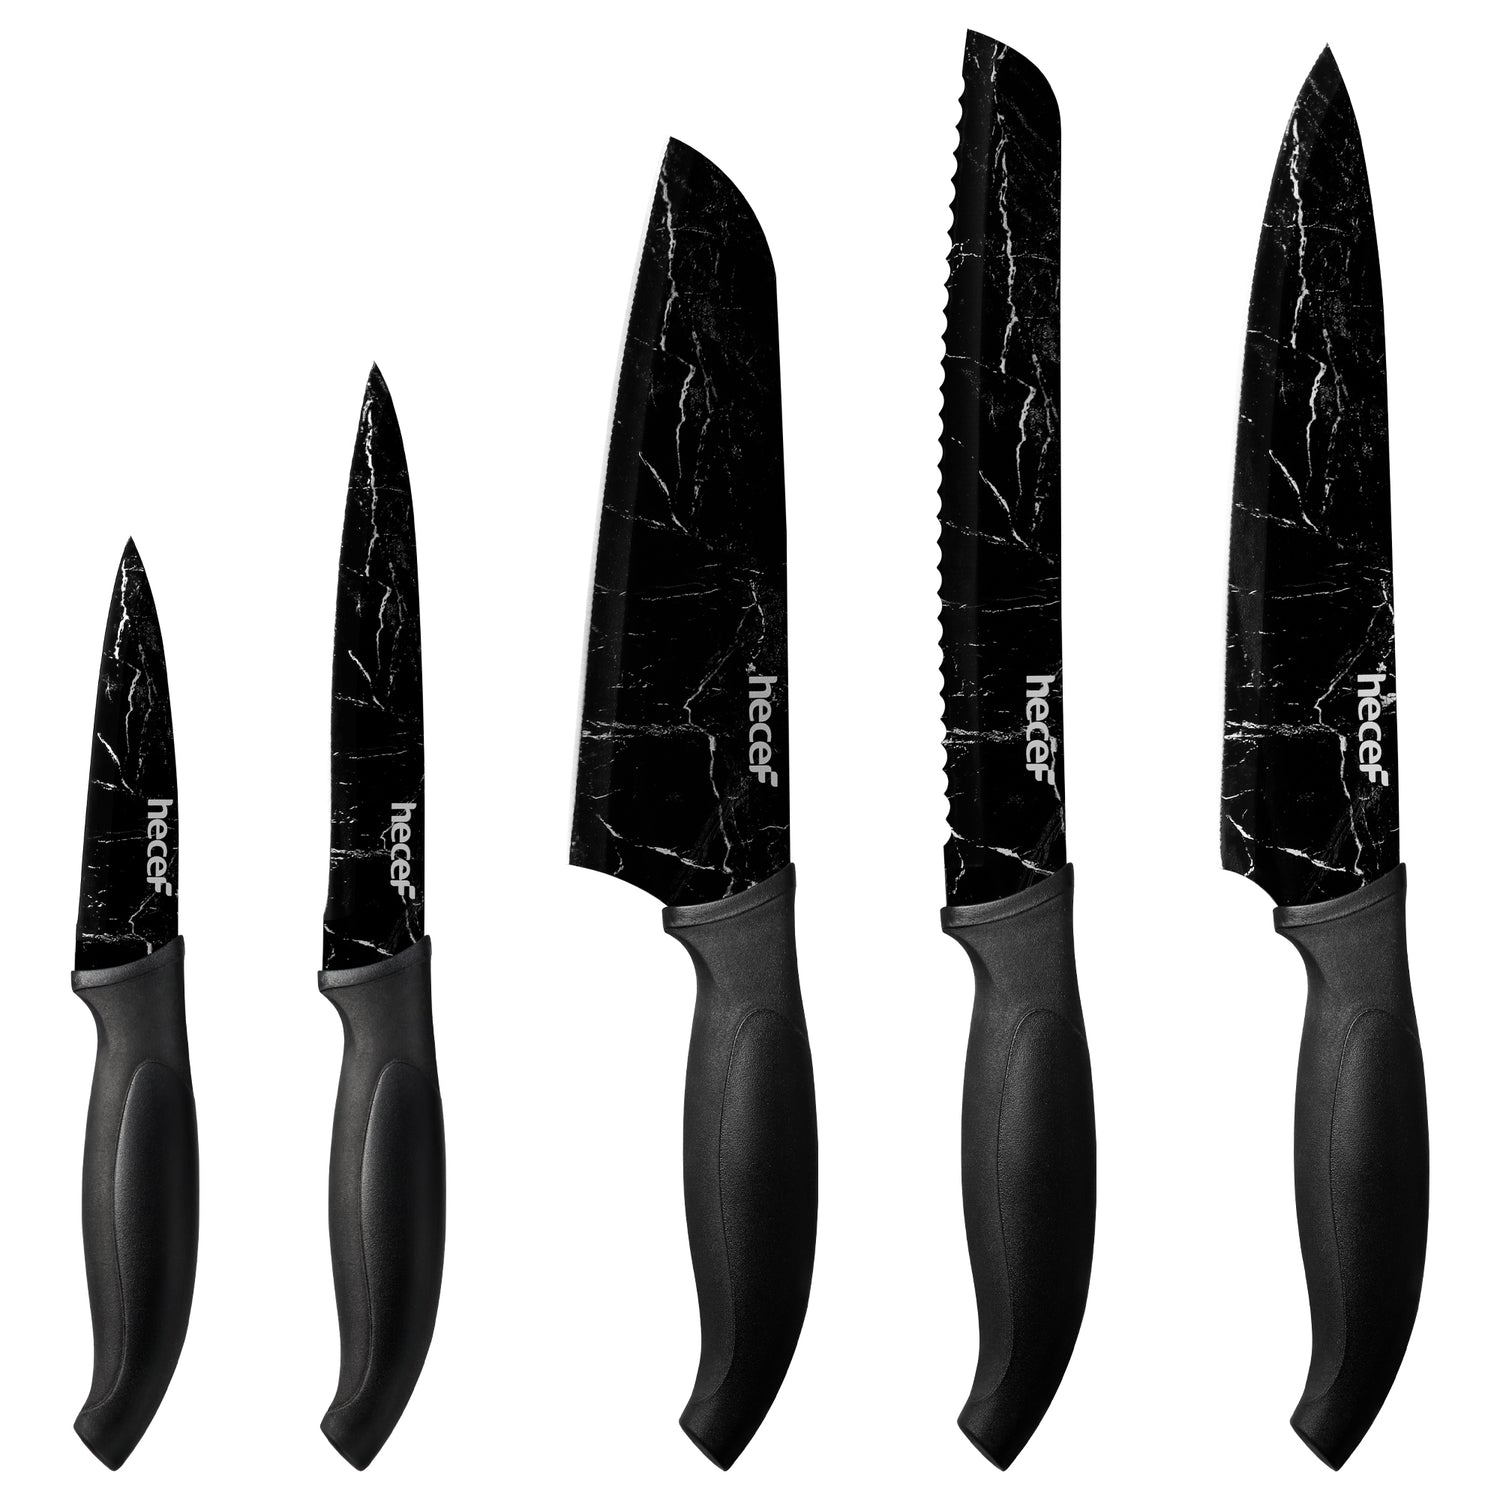 hecef Kitchen Knife Set of 5, Sharp Stainless Steel wtih Black Marble Pattern, Professional Cooking Knives Set Including Paring, Utility, Bread, Carving, Santoku & Chef Knife - Hecef Kitchen